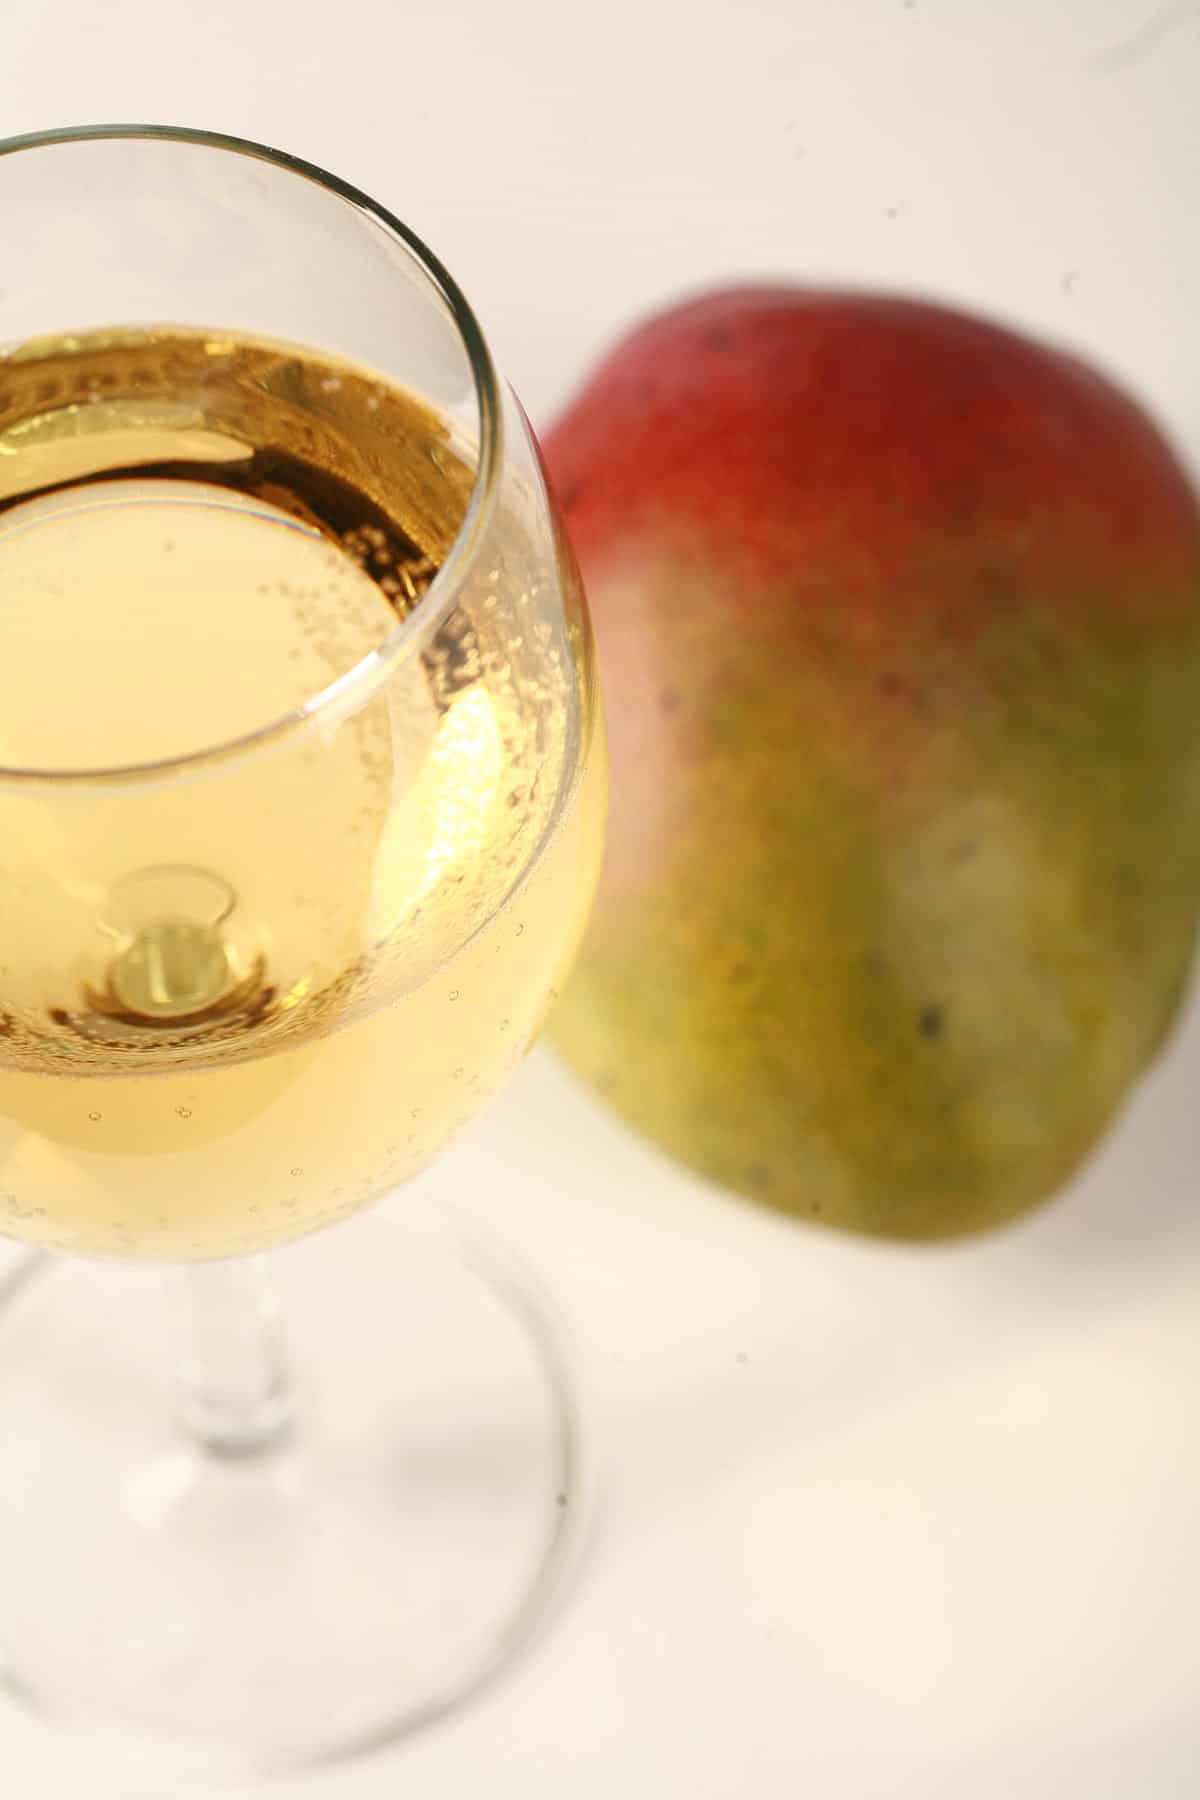 A glass of straw coloured wine is pictured next to a whole mango.